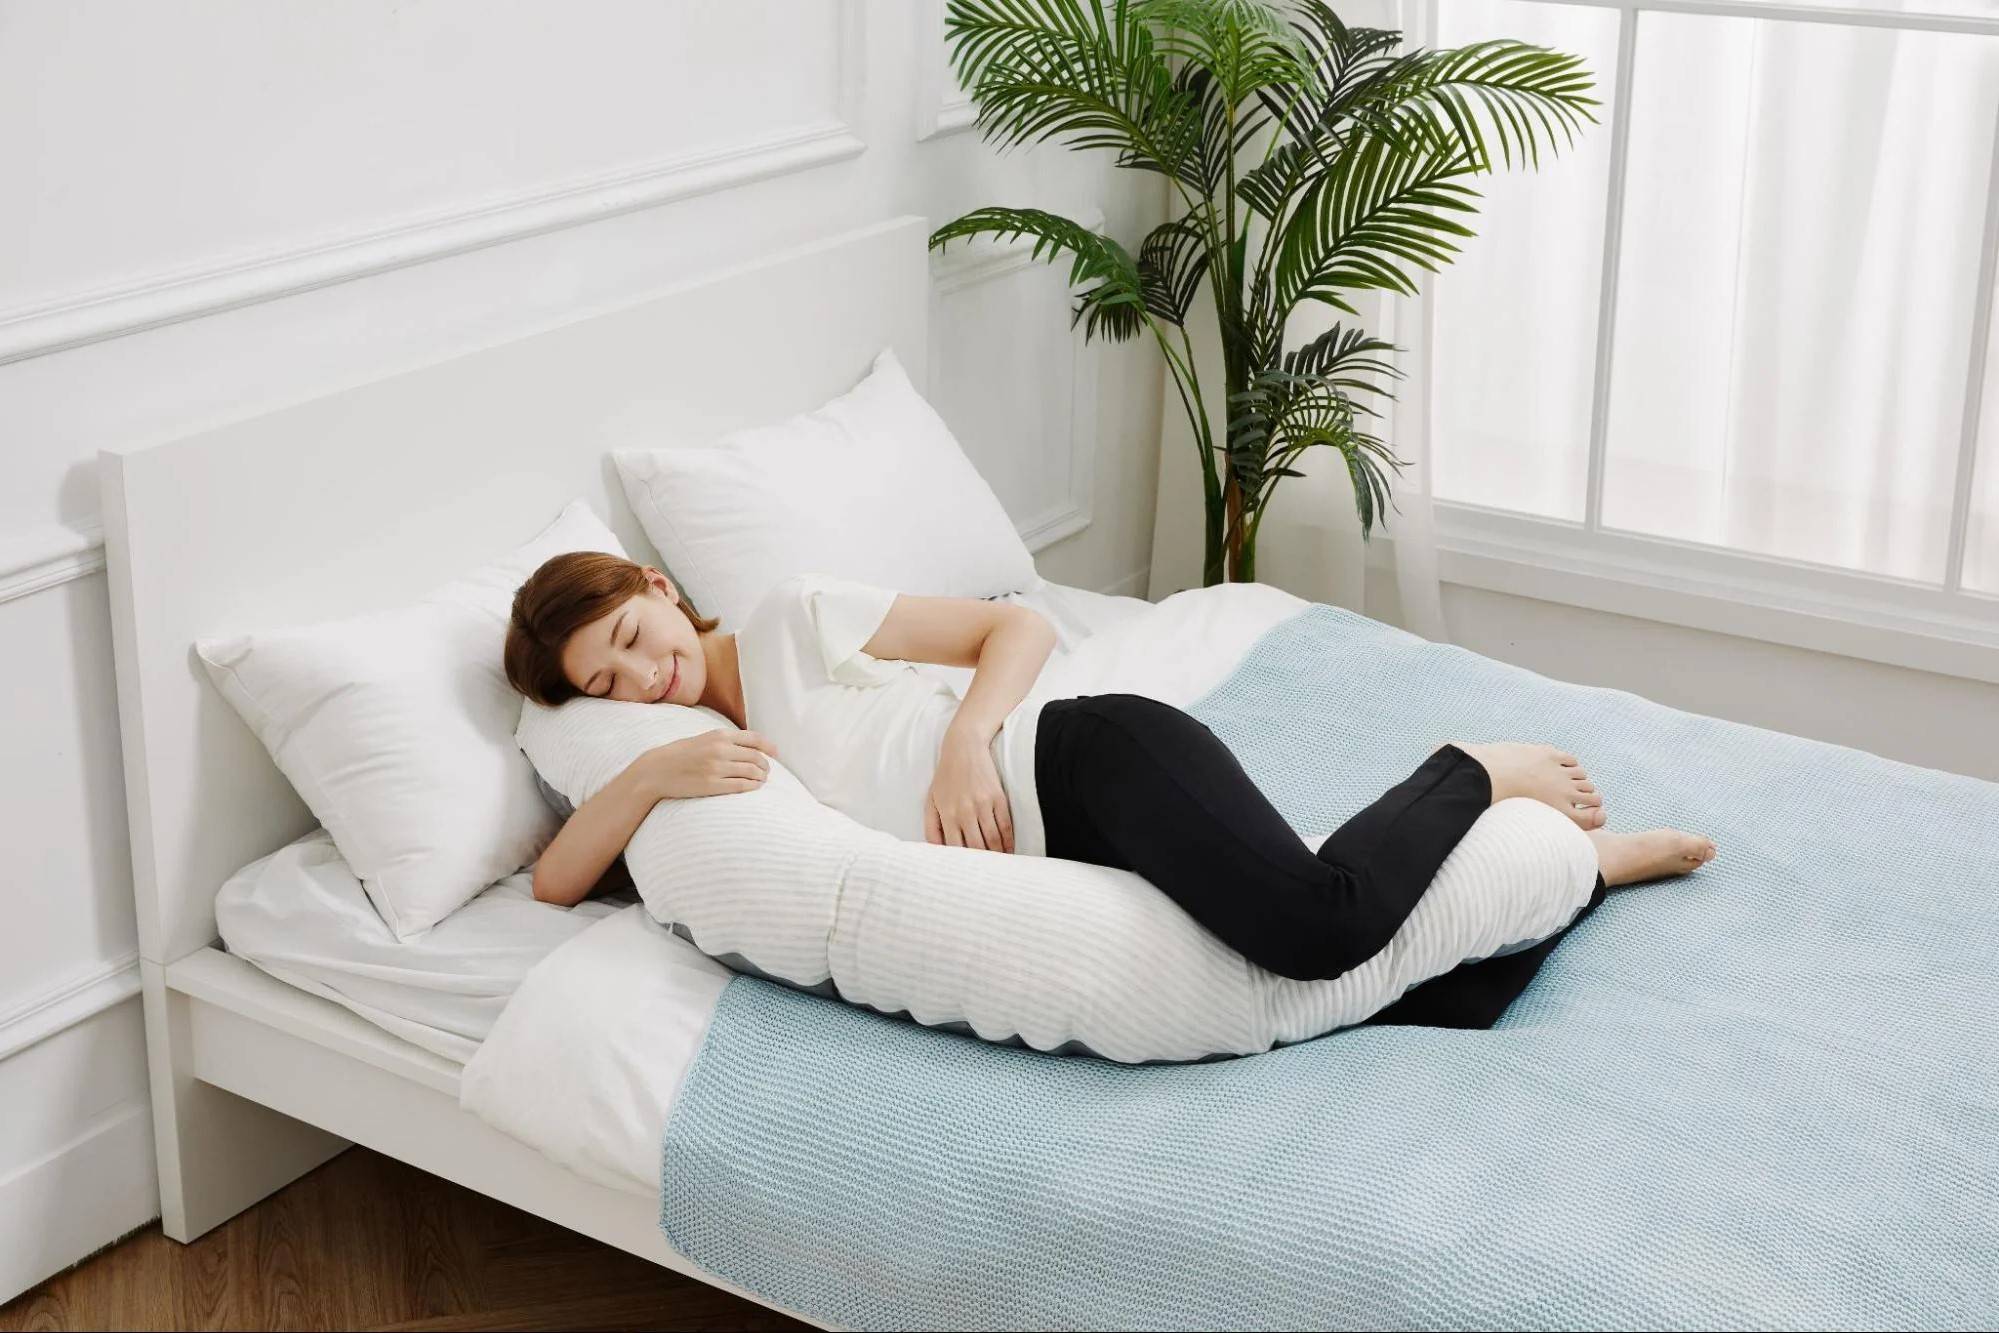 How To Use Pregnancy Pillow